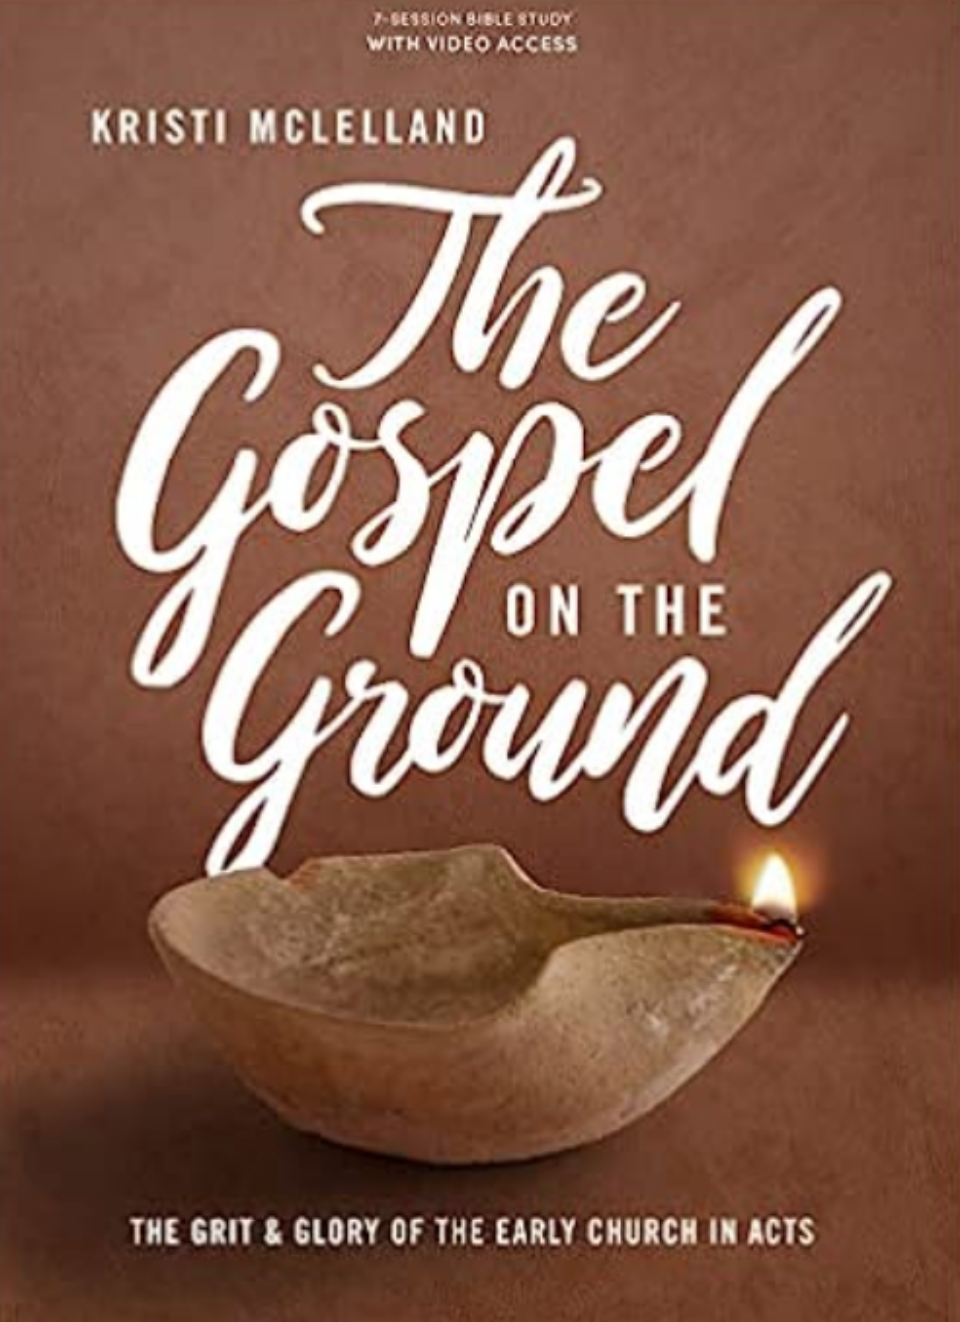 Congrats to Becky D. who won The Gospel on the Ground by Kristi McLelland